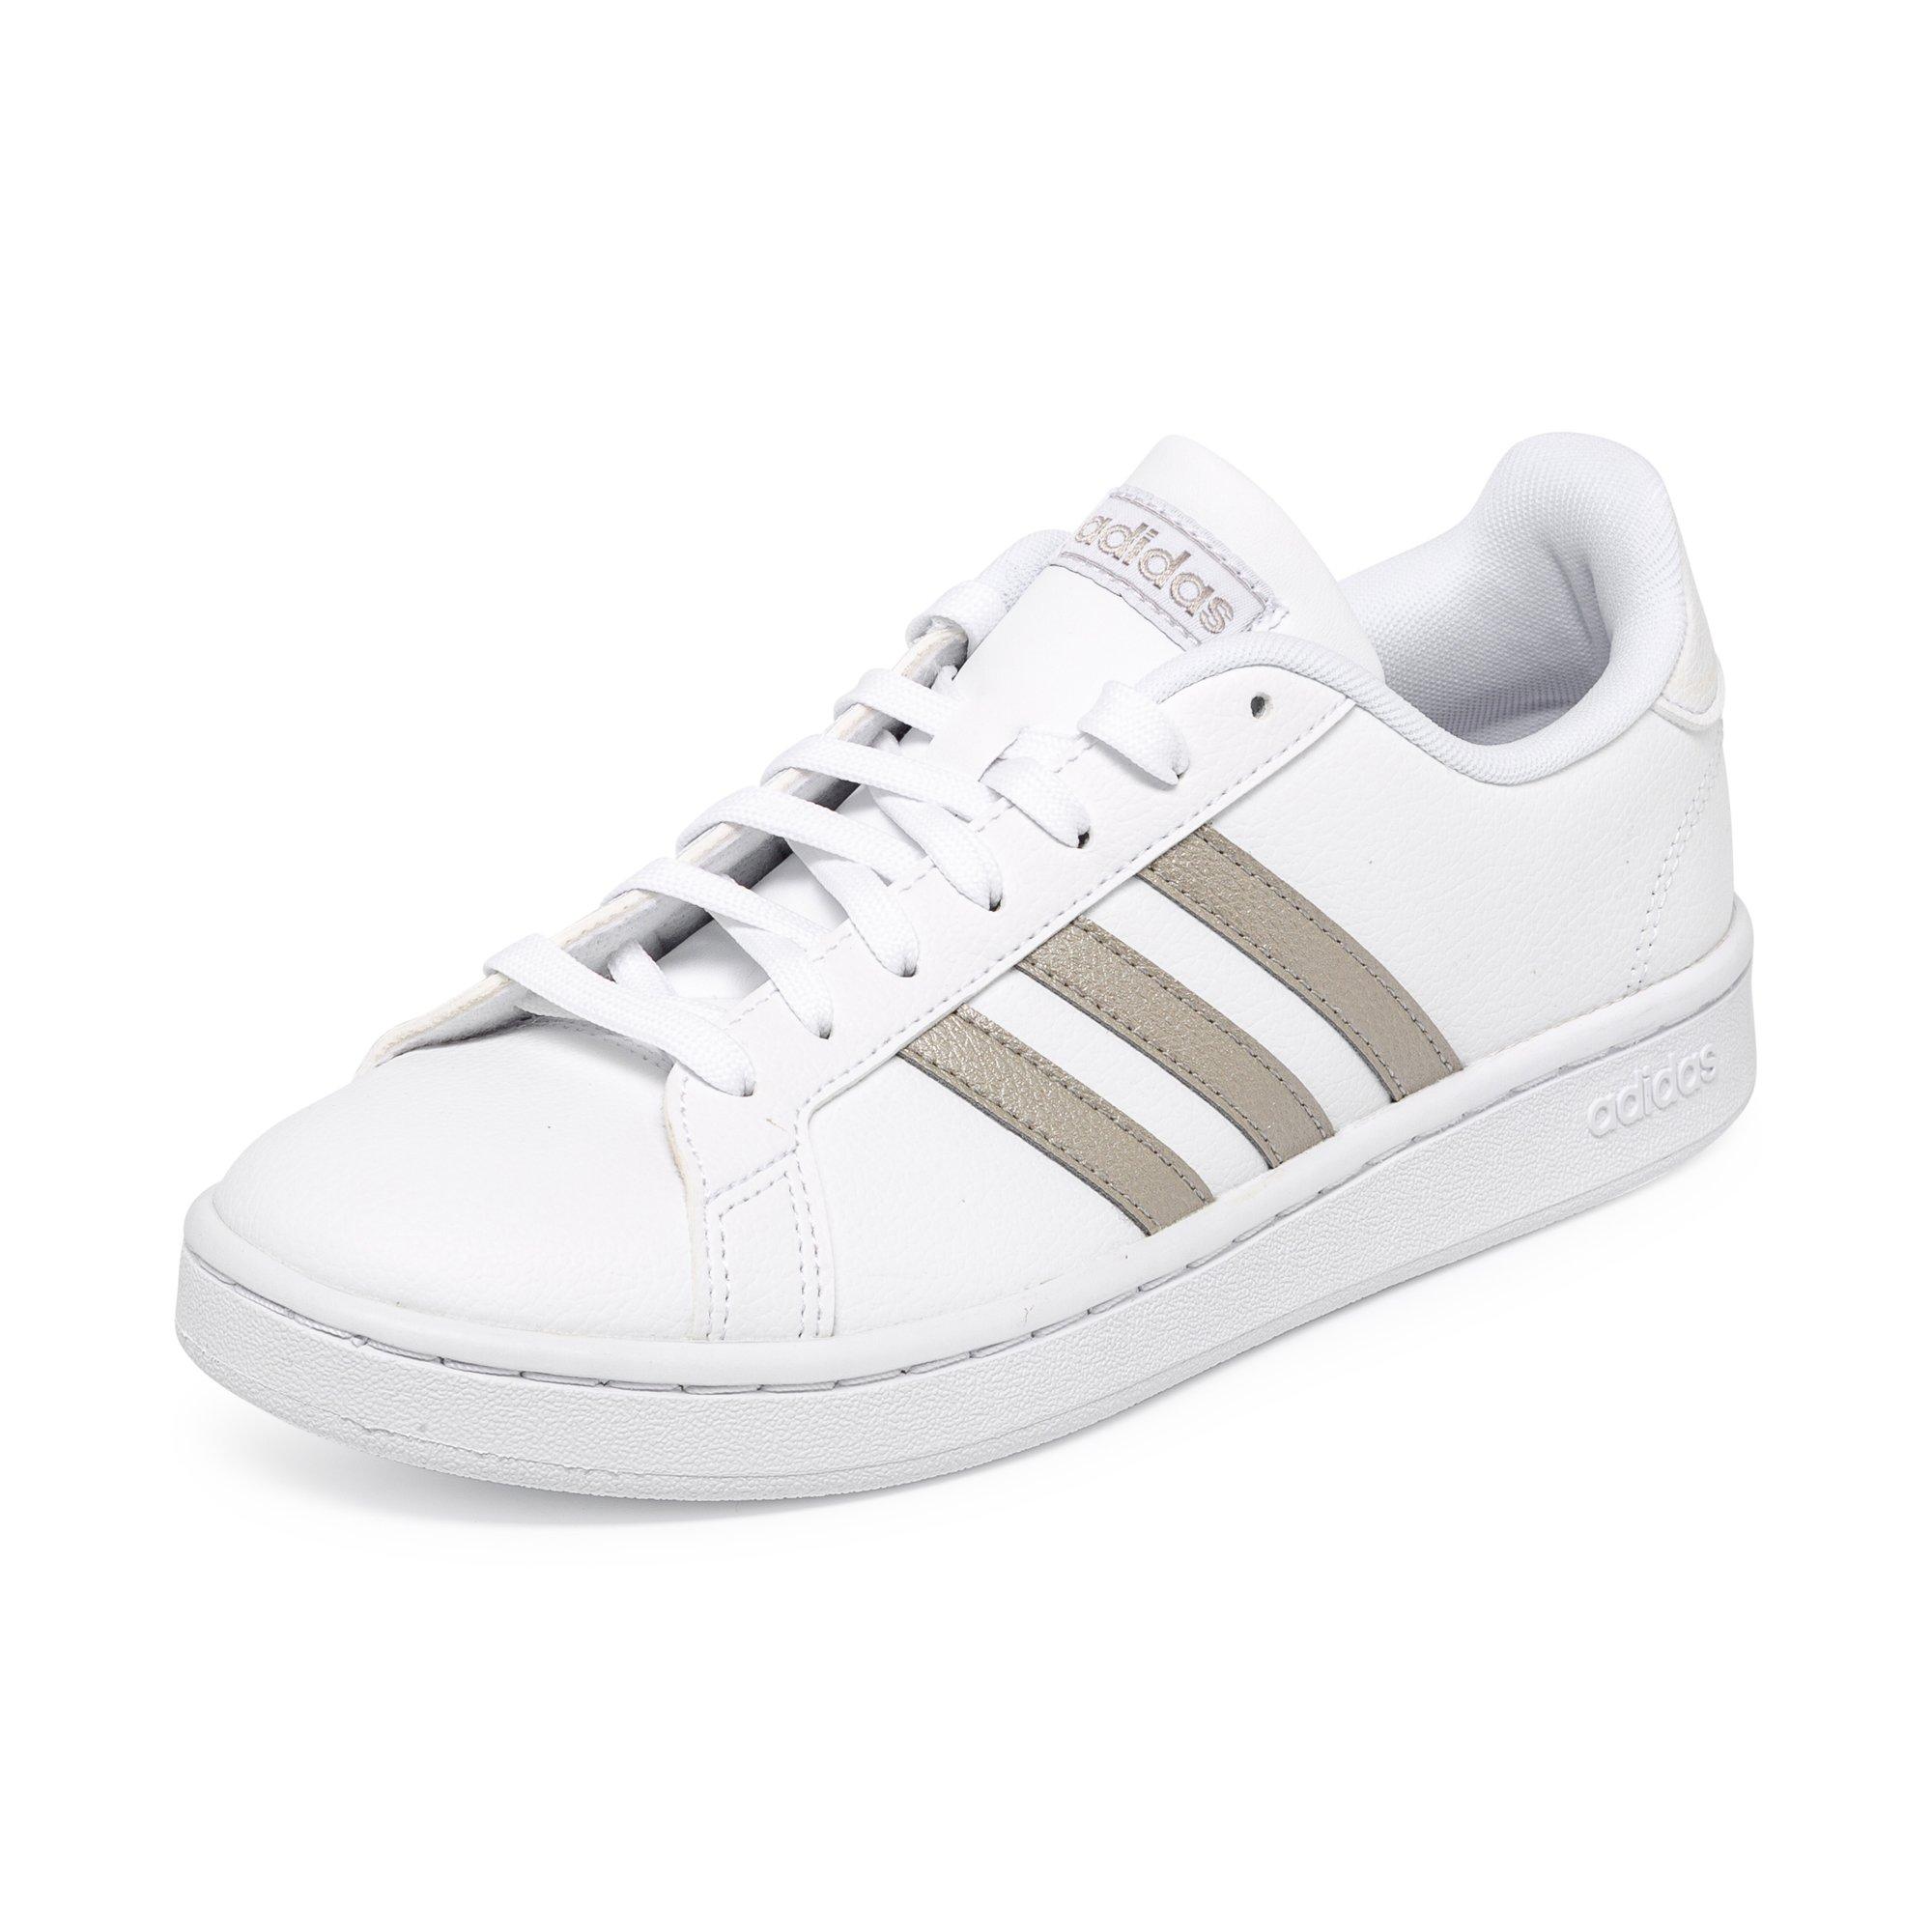 Image of adidas Grand Court Sneakers, Low Top - 36 2/3